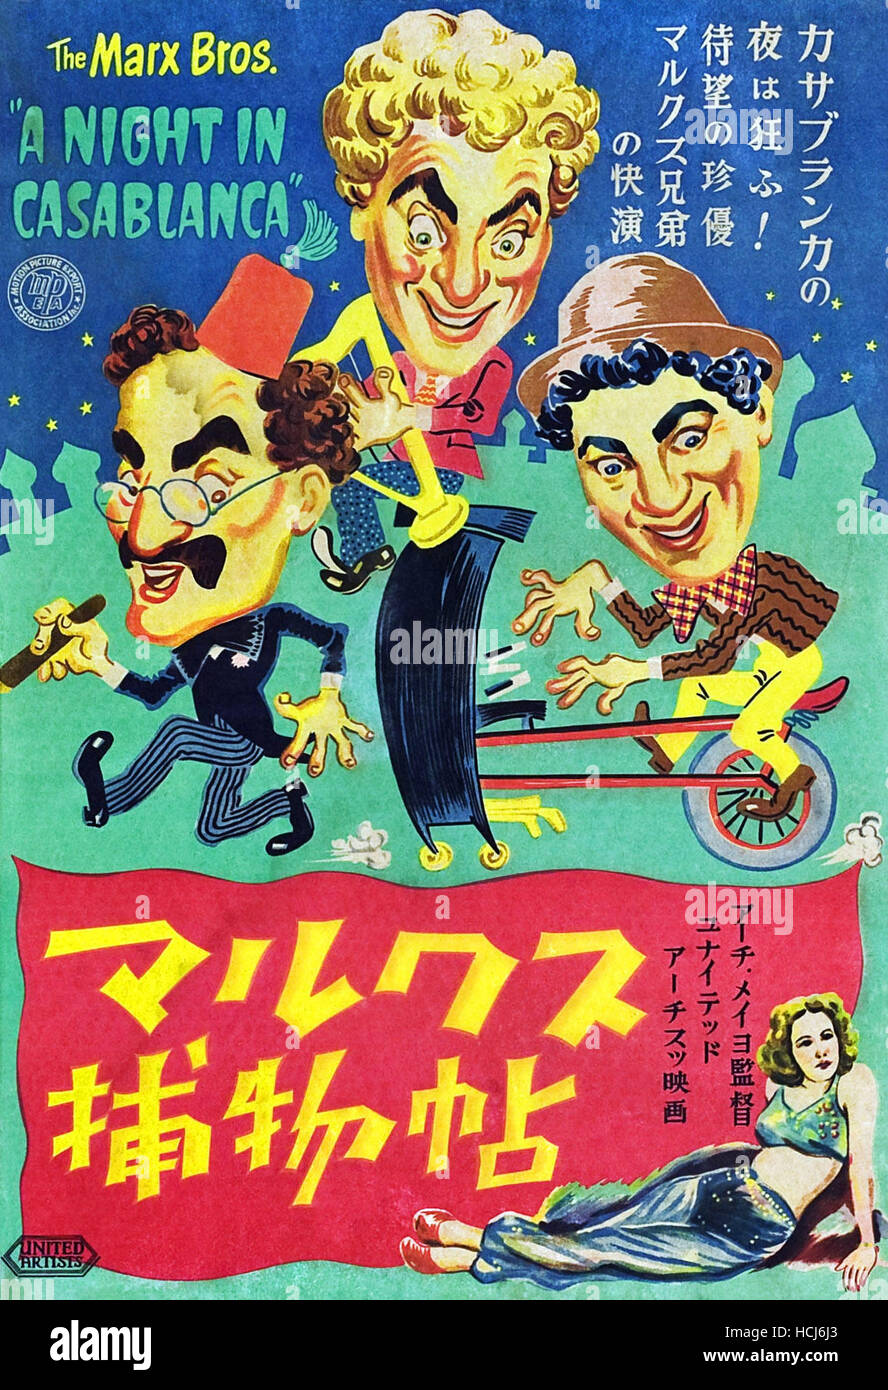 A NIGHT IN CASABLANCA, The Marx Brothers, top l-r: Groucho Marx, Harpo Marx, Chico Marx, bottom: Lisette Verea on Japanese Stock Photo